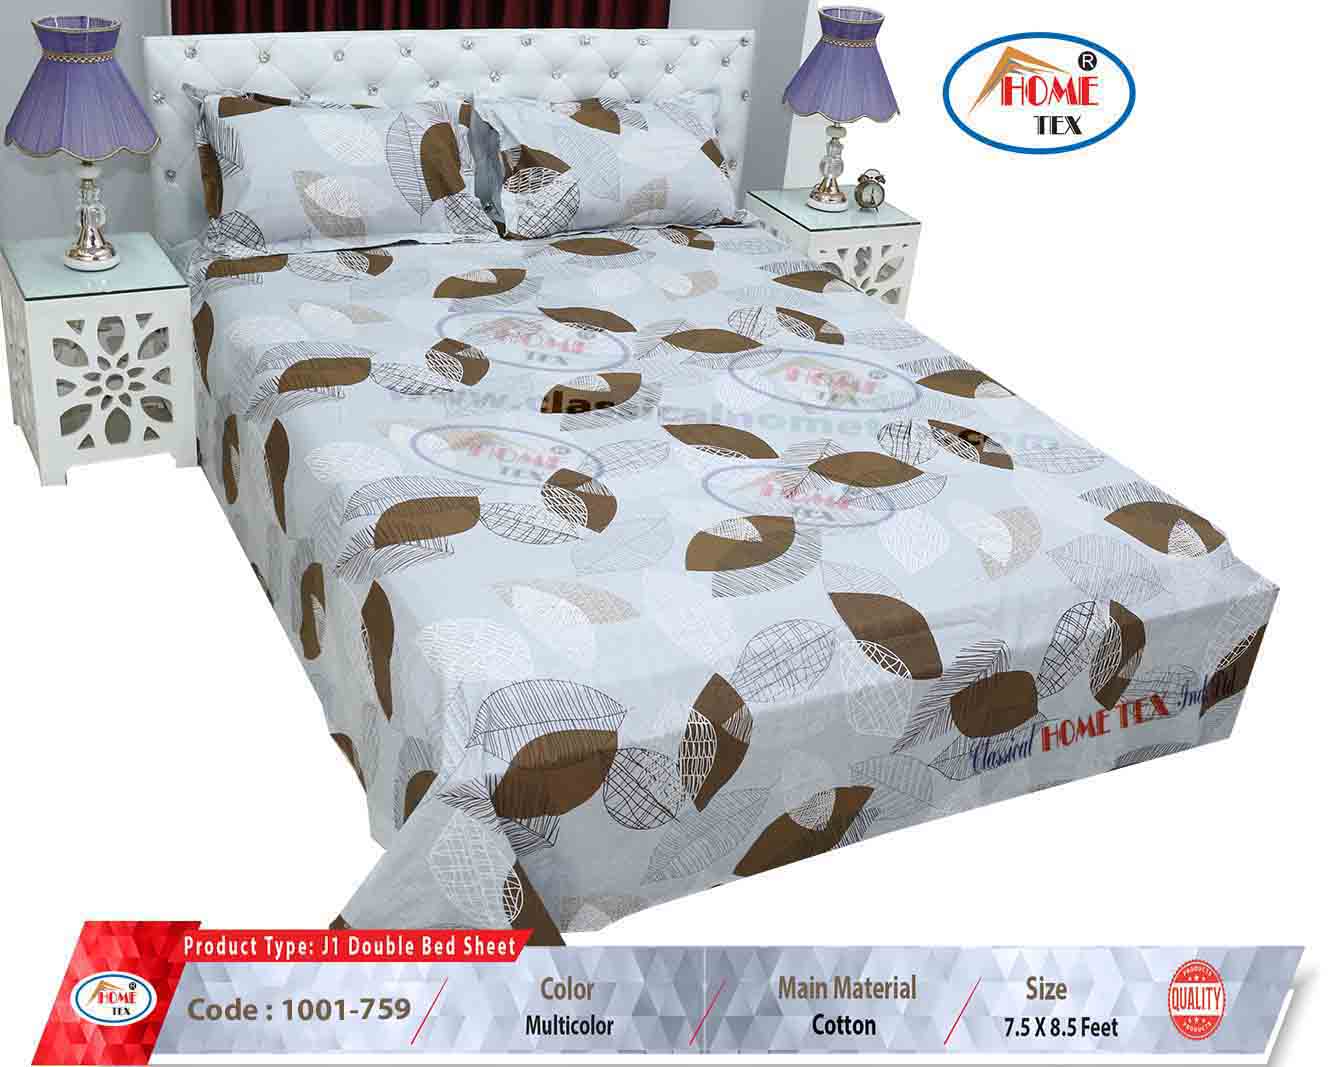 Buy Home Tex Bed Sheets Bed Covers At A Cheap Price In Bangladesh From Classical Home Tex Ind Ltd